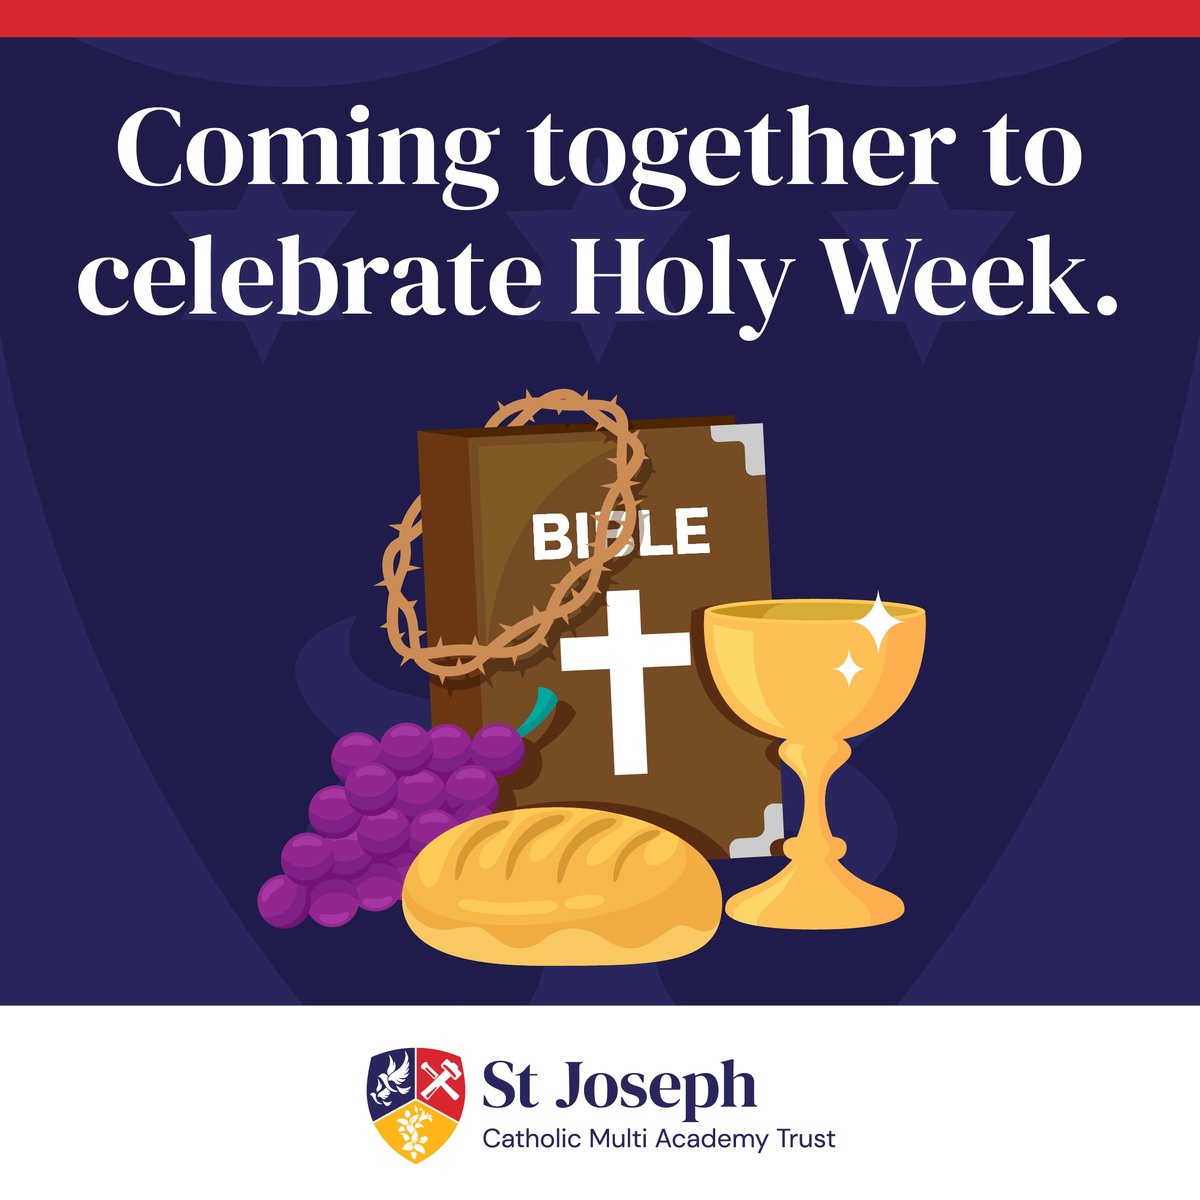 Today, we are proud of having pupils from all our academies participate in the Holy Liturgy at @NDEvertonValley. What a memorable and meaningful celebration to hold ahead of the Holy Week! You will be able to participate in the Liturgy soon - look out for the link to the video.